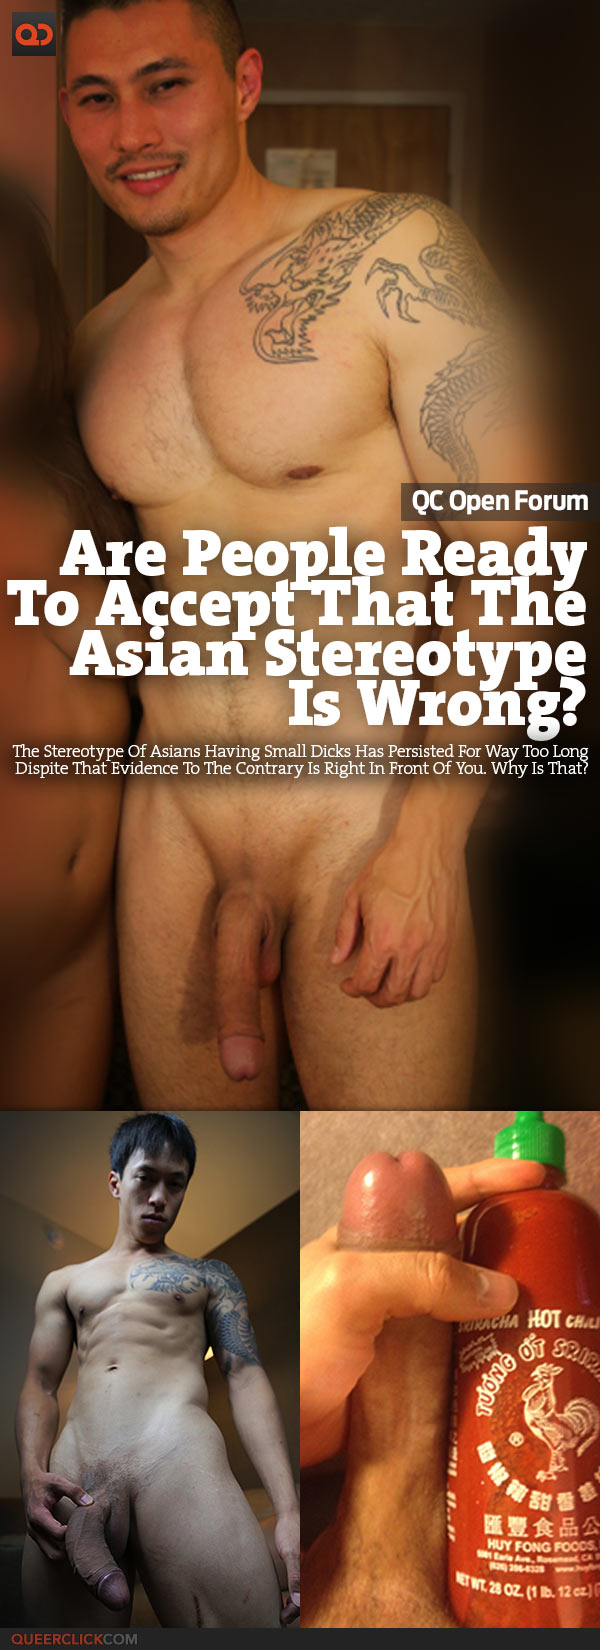 QC Open Forum: Are People Ready To Accept That The Asian Stereotype Is Wrong?